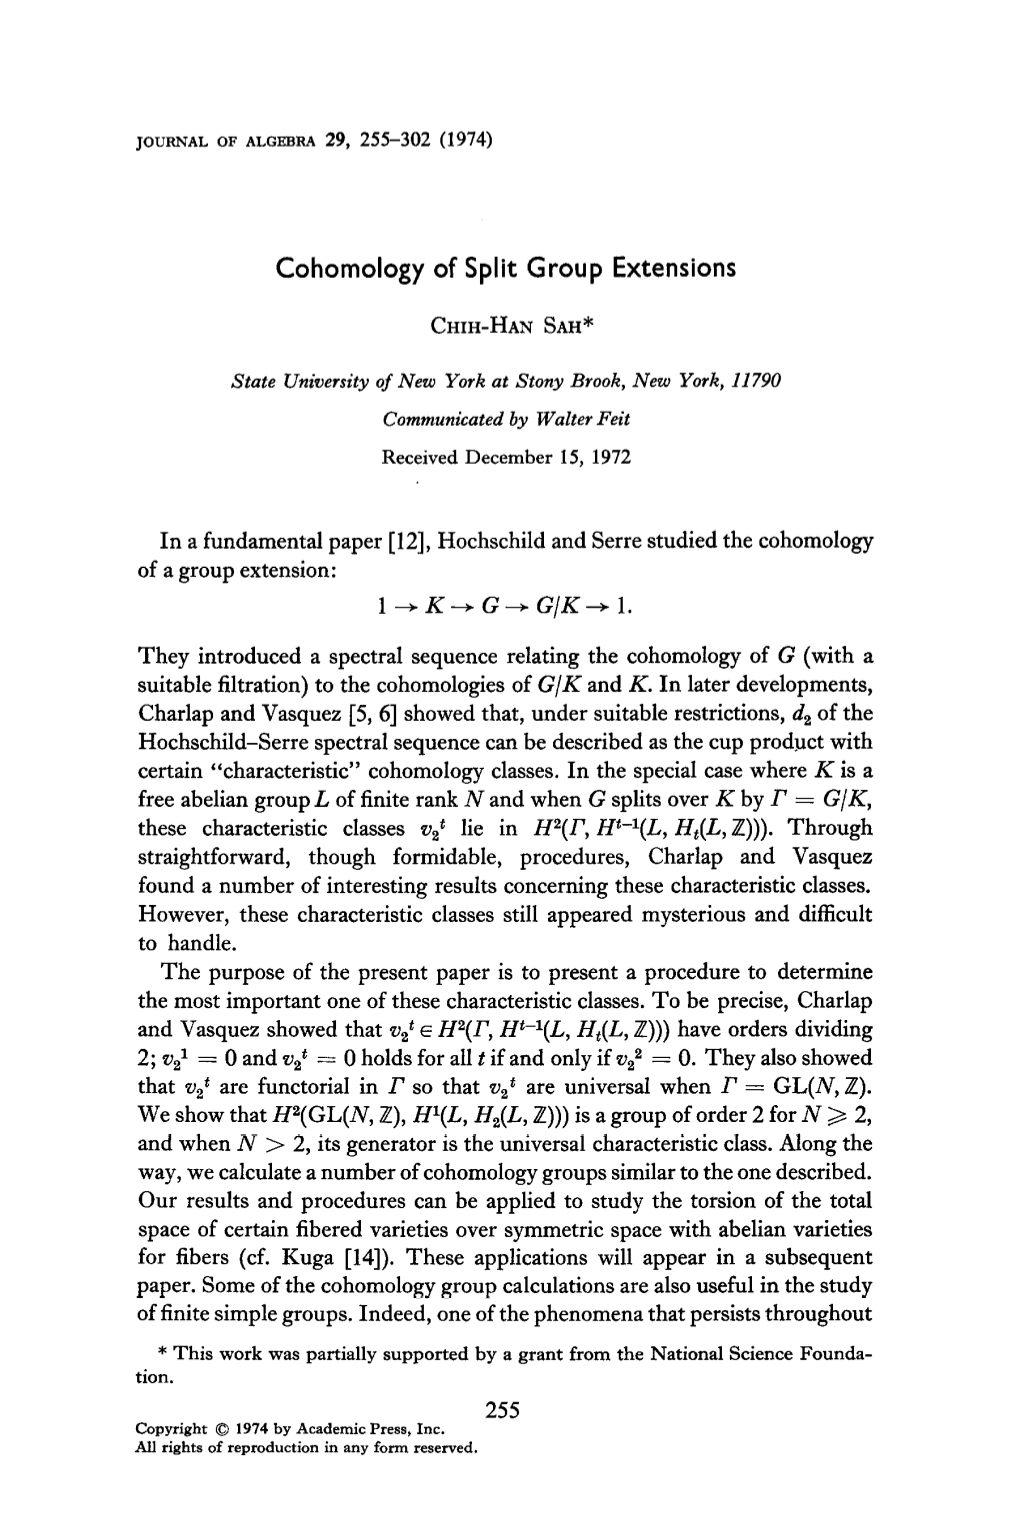 Cohomology of Split Group Extensions